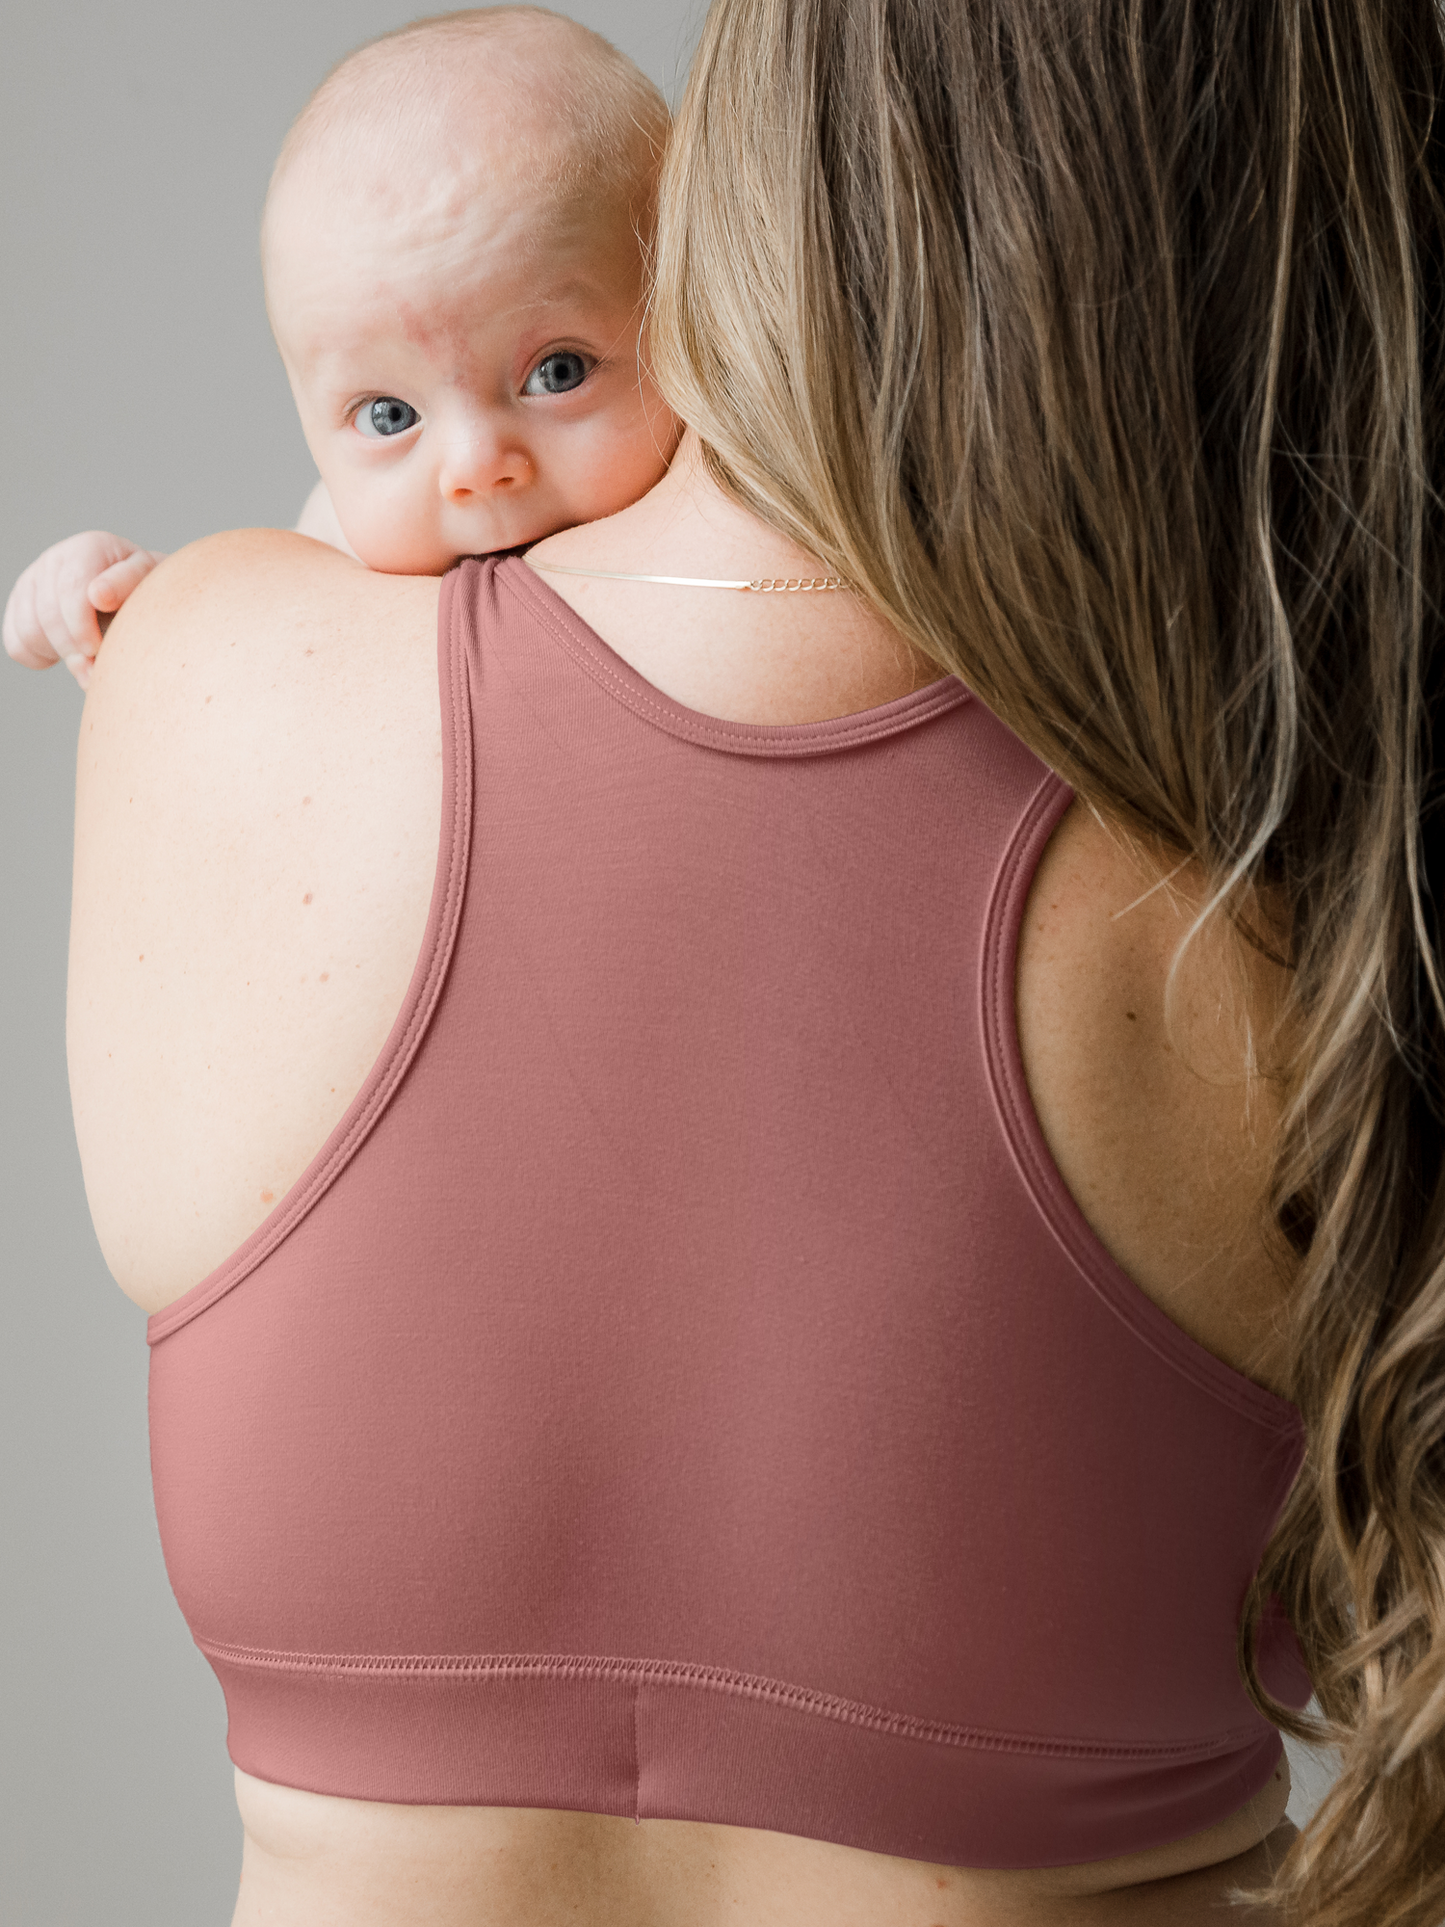 French Terry Racerback Nursing Bra in Redwood with a baby peeking over the mother's shoulder.